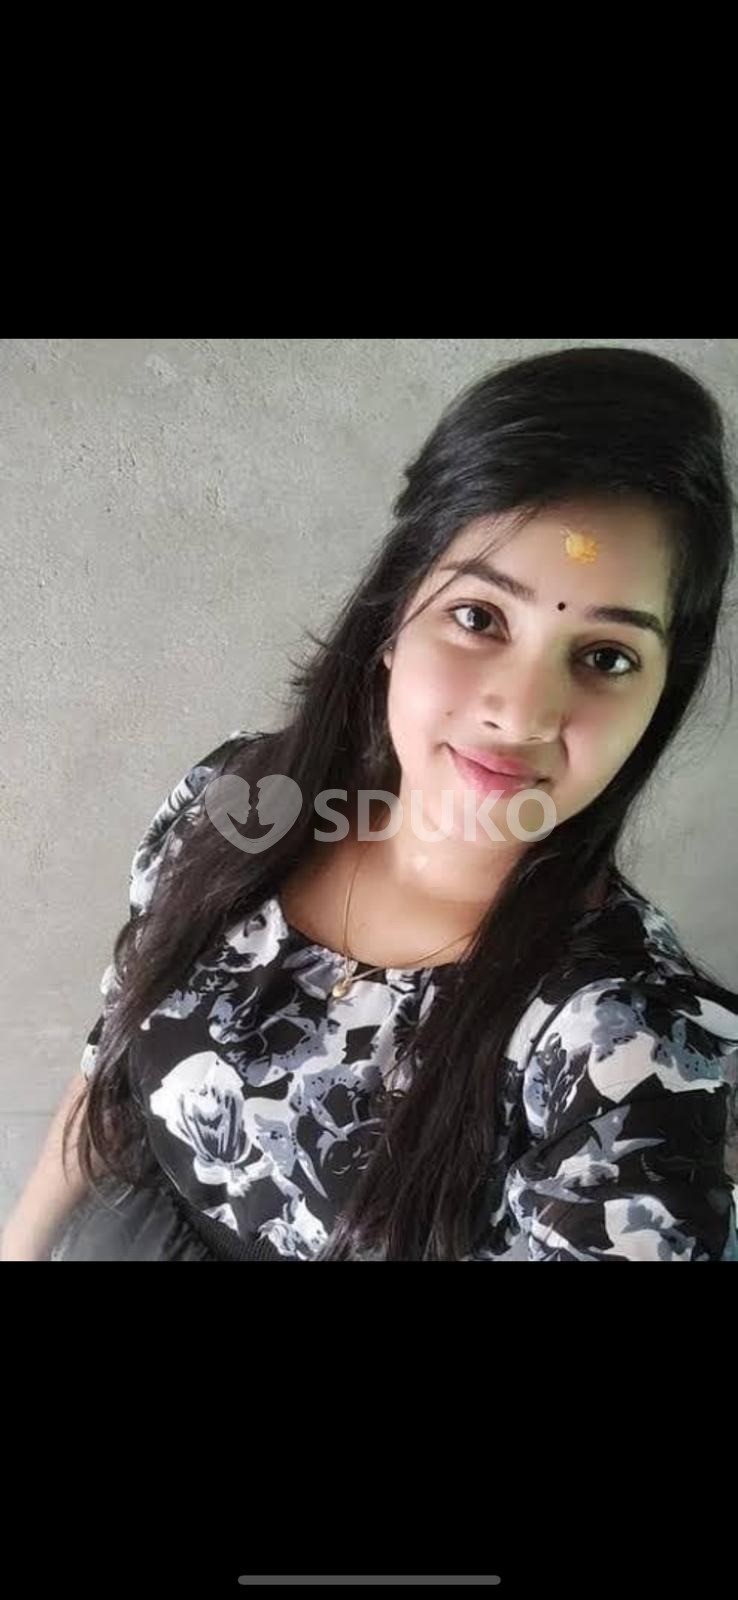 Peenya......... low price 🥰..100% SAFE AND SECURE TODAY LOW PRICE UNLIMITED ENJOY HOT COLLEGE GIRL HOUSEWIFE AUNTIES 